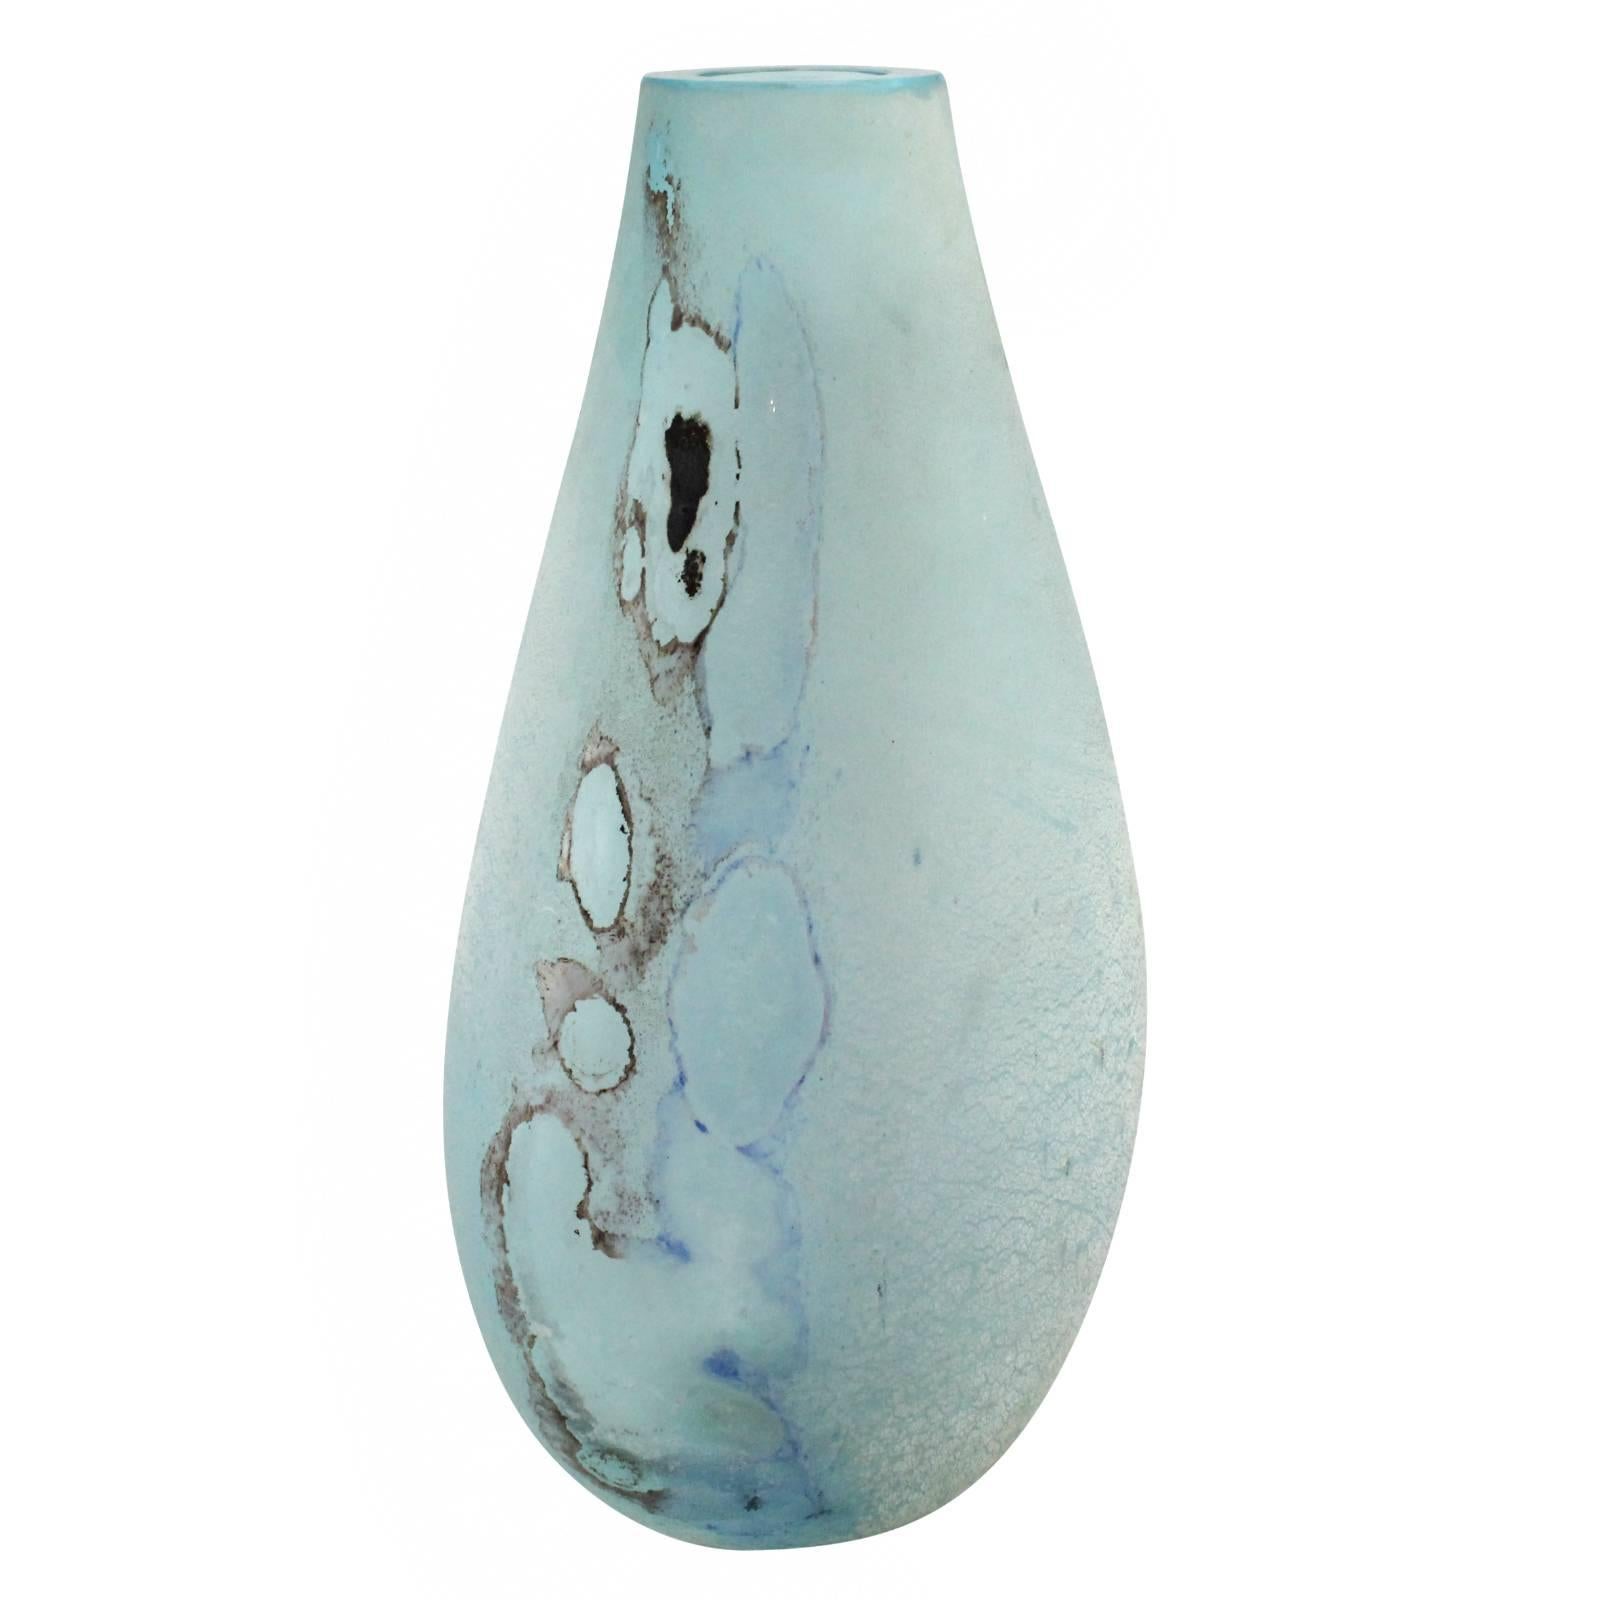 A monumental 20th century Murano glass vase by Barbini. The large blue glass vase has been completed with a textured 